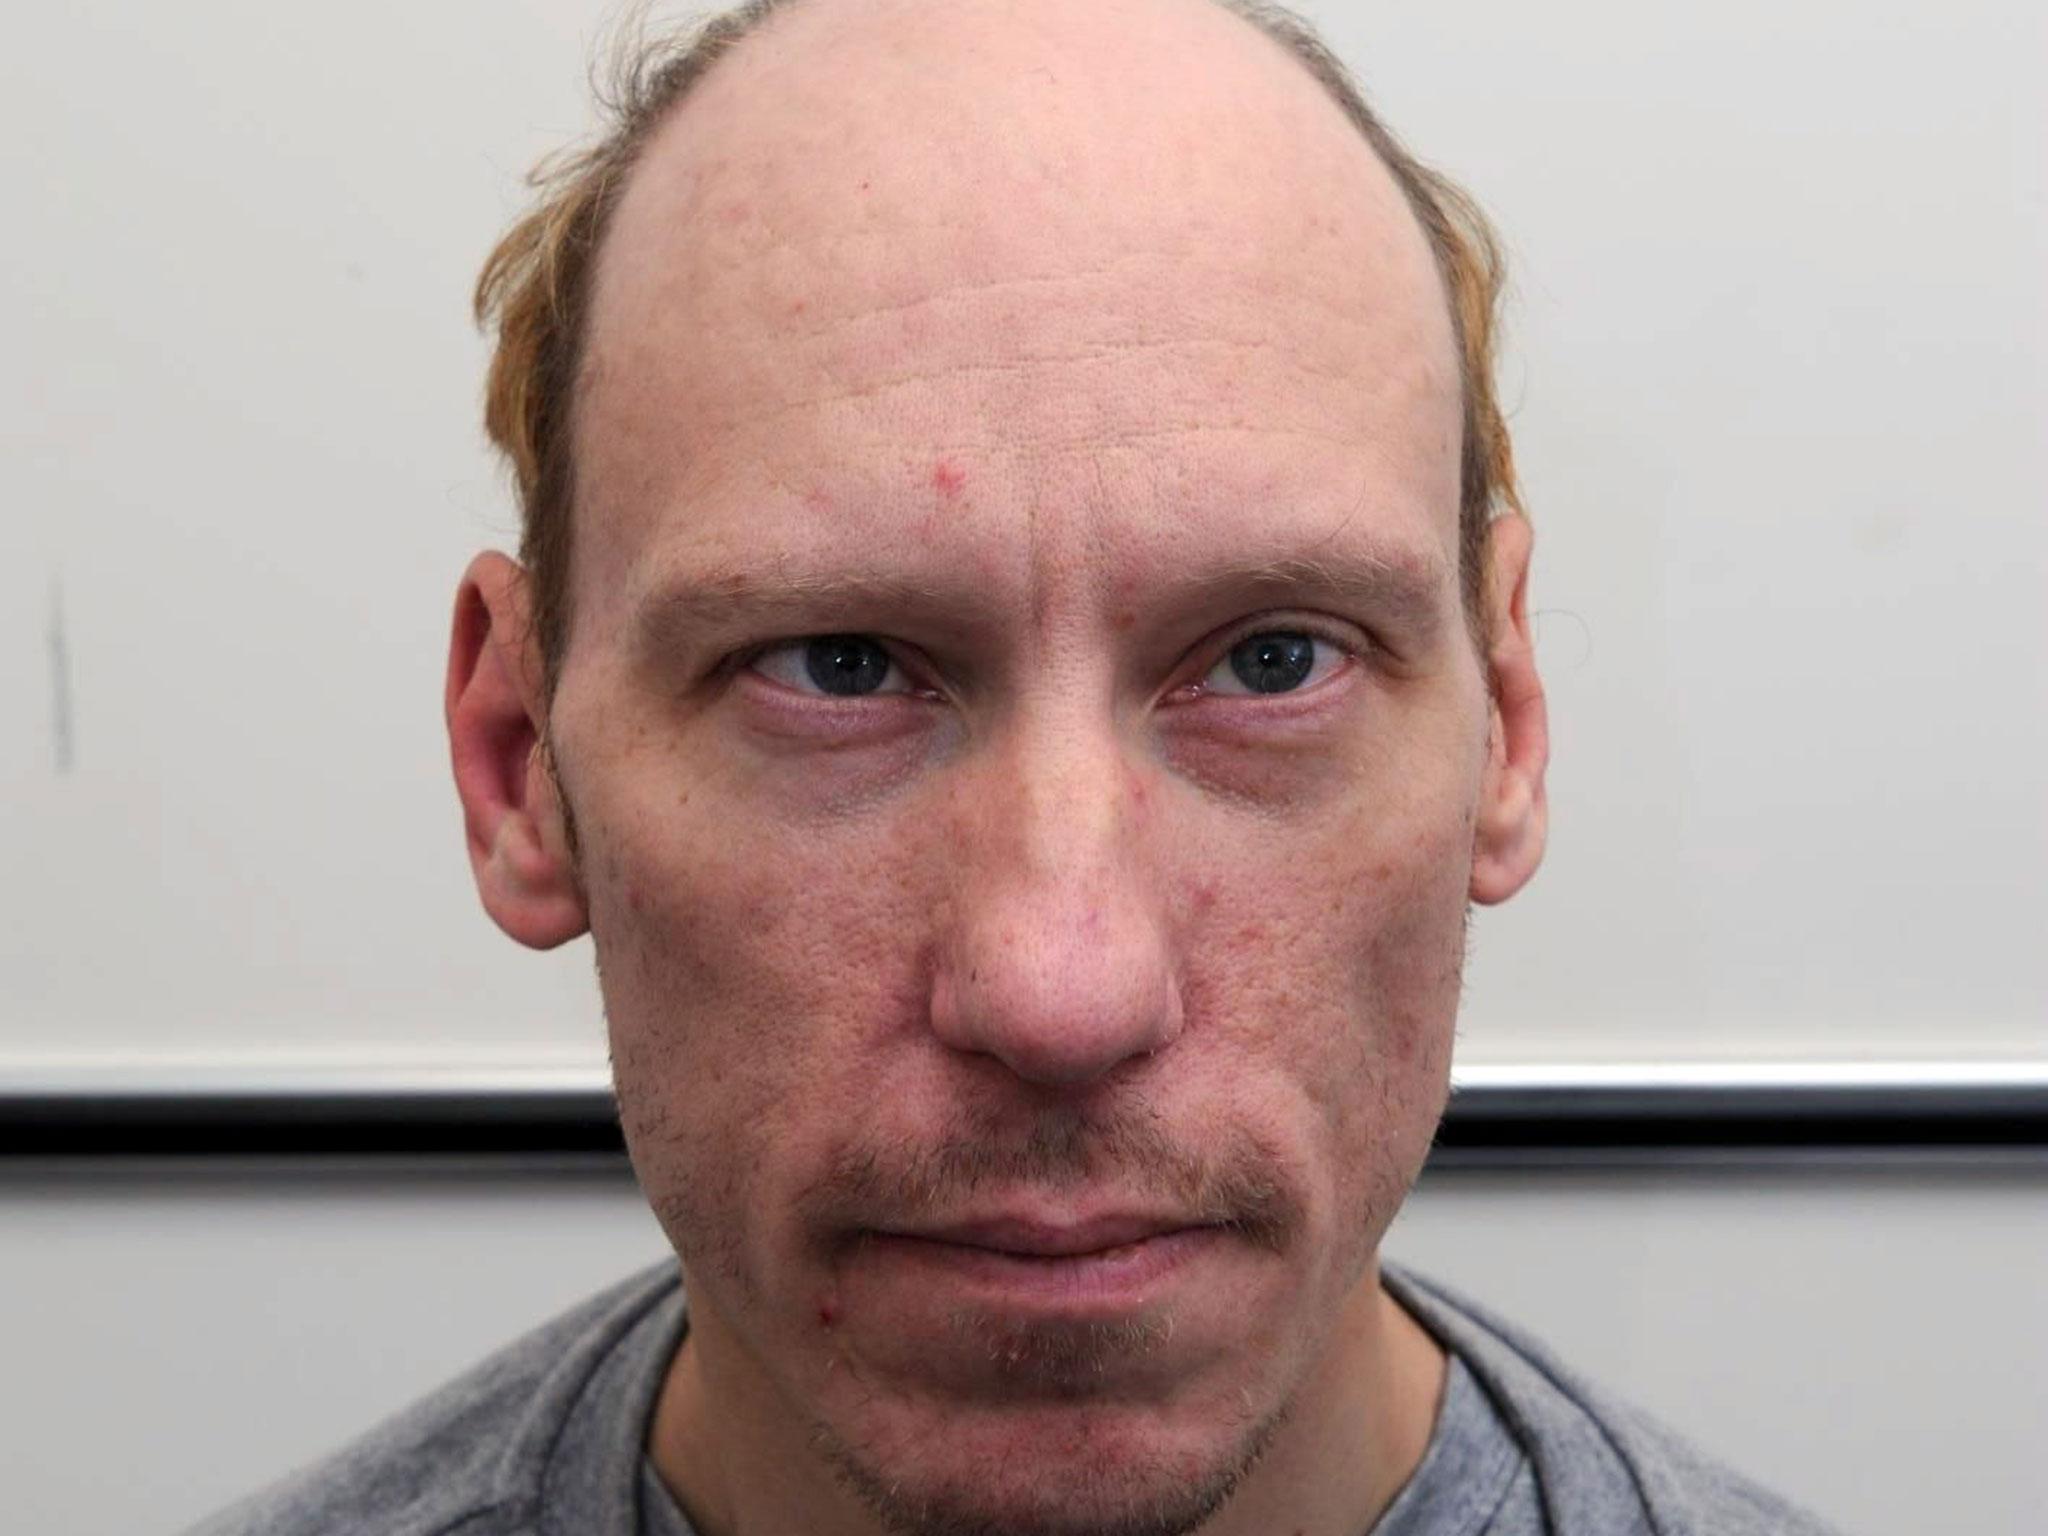 Serial killer Stephen Port could be facing the rest of his life in prison when sentenced for the murders of four young gay men